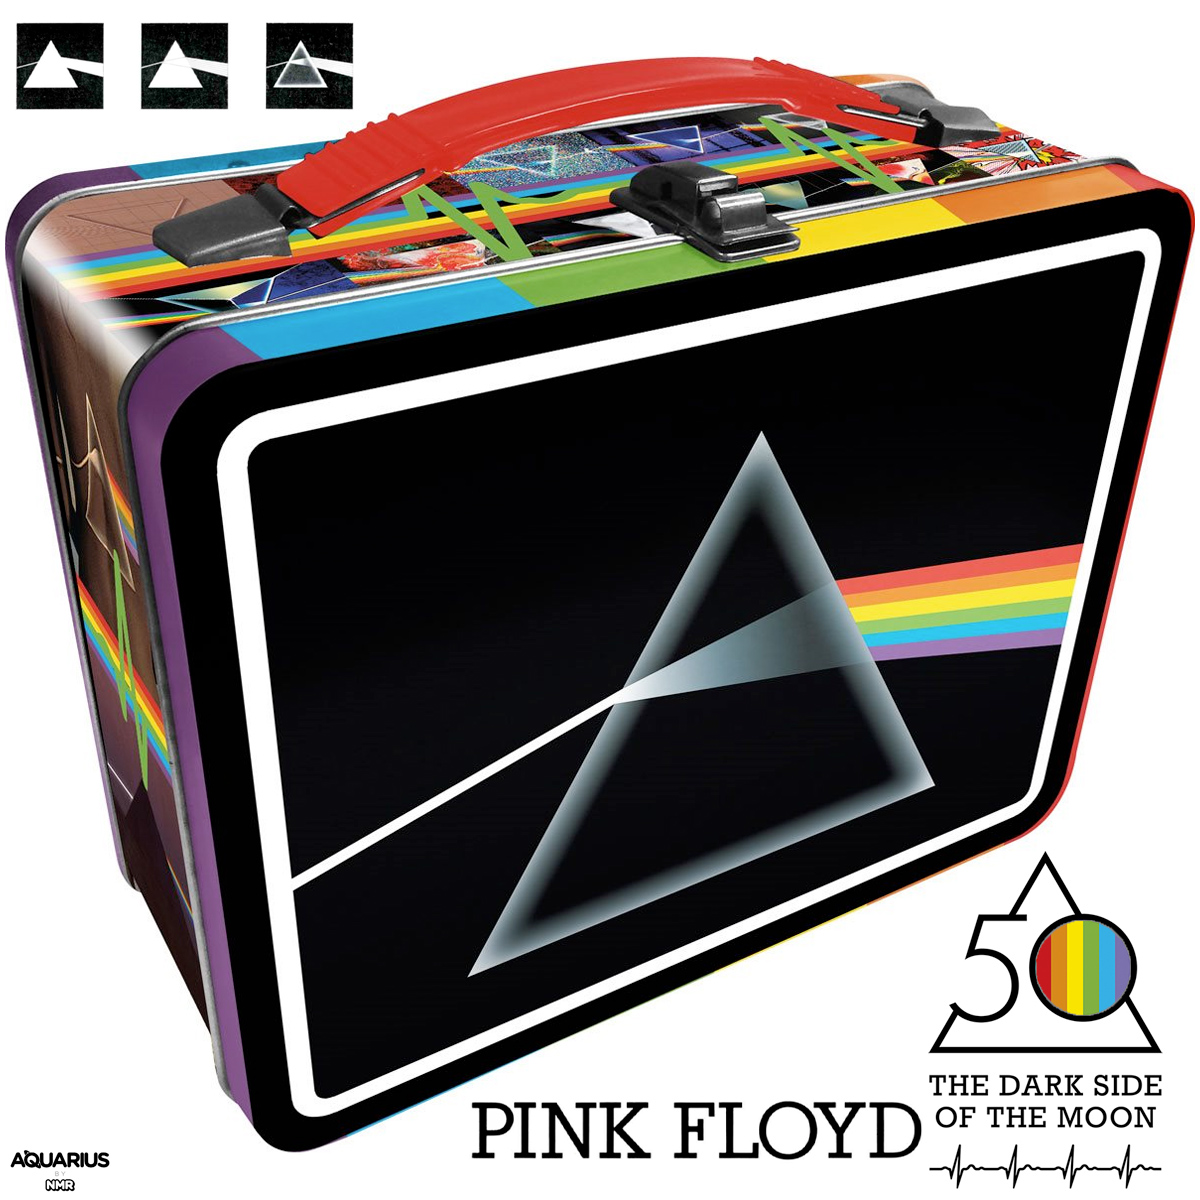 Lancheira Pink Floyd The Dark Side of the Moon 50 Anos